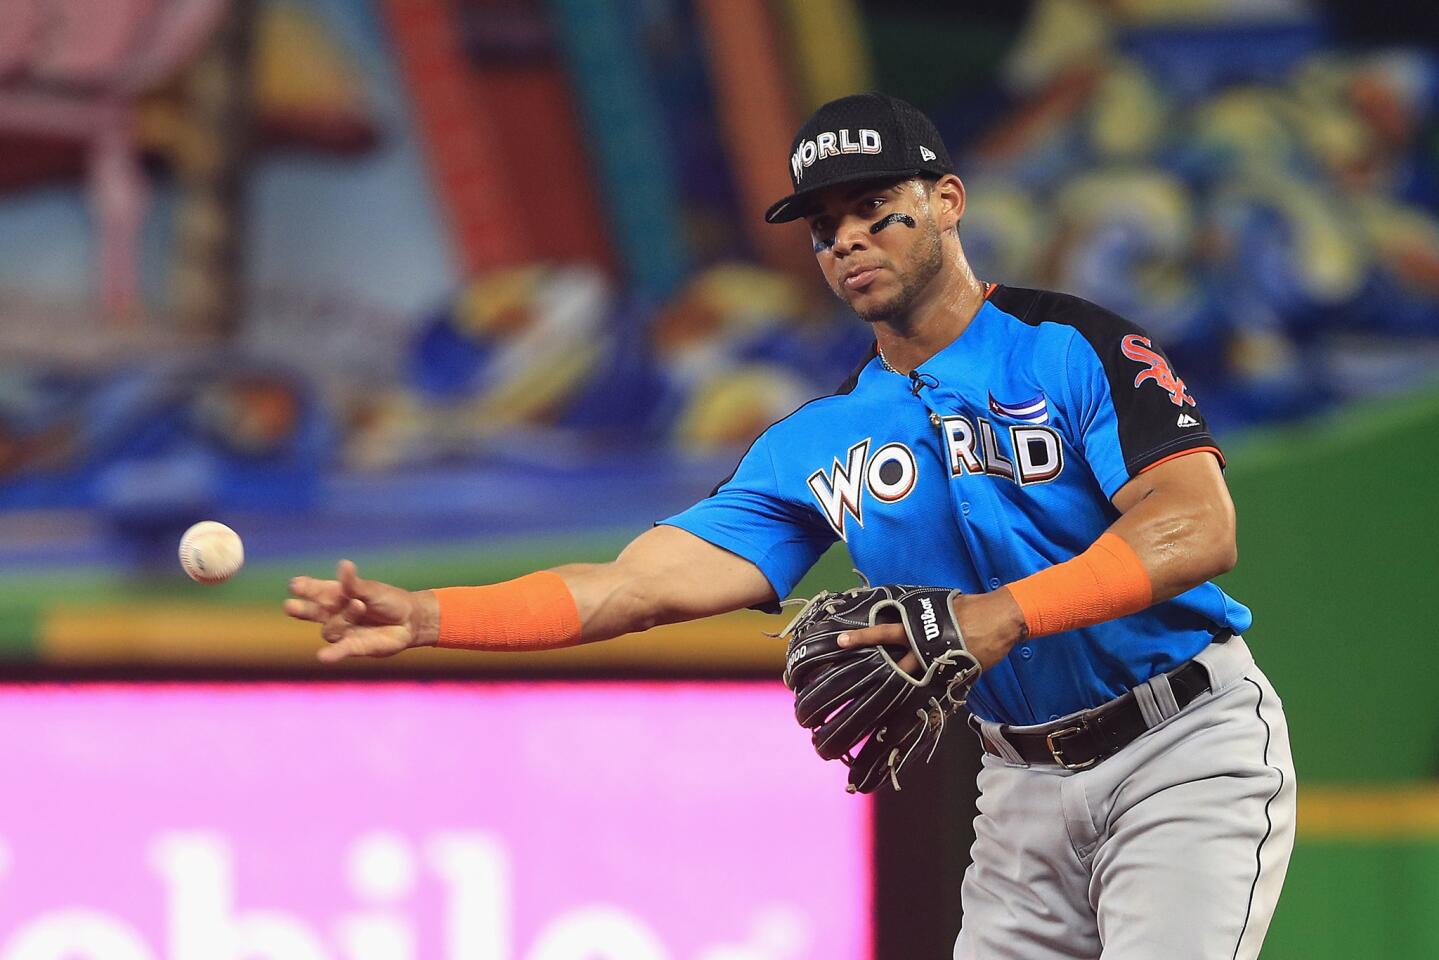 Yoan Moncada fields a ball against the U.S. Team during the SiriusXM All-Star Futures Game at Marlins Park on July 9, 2017,